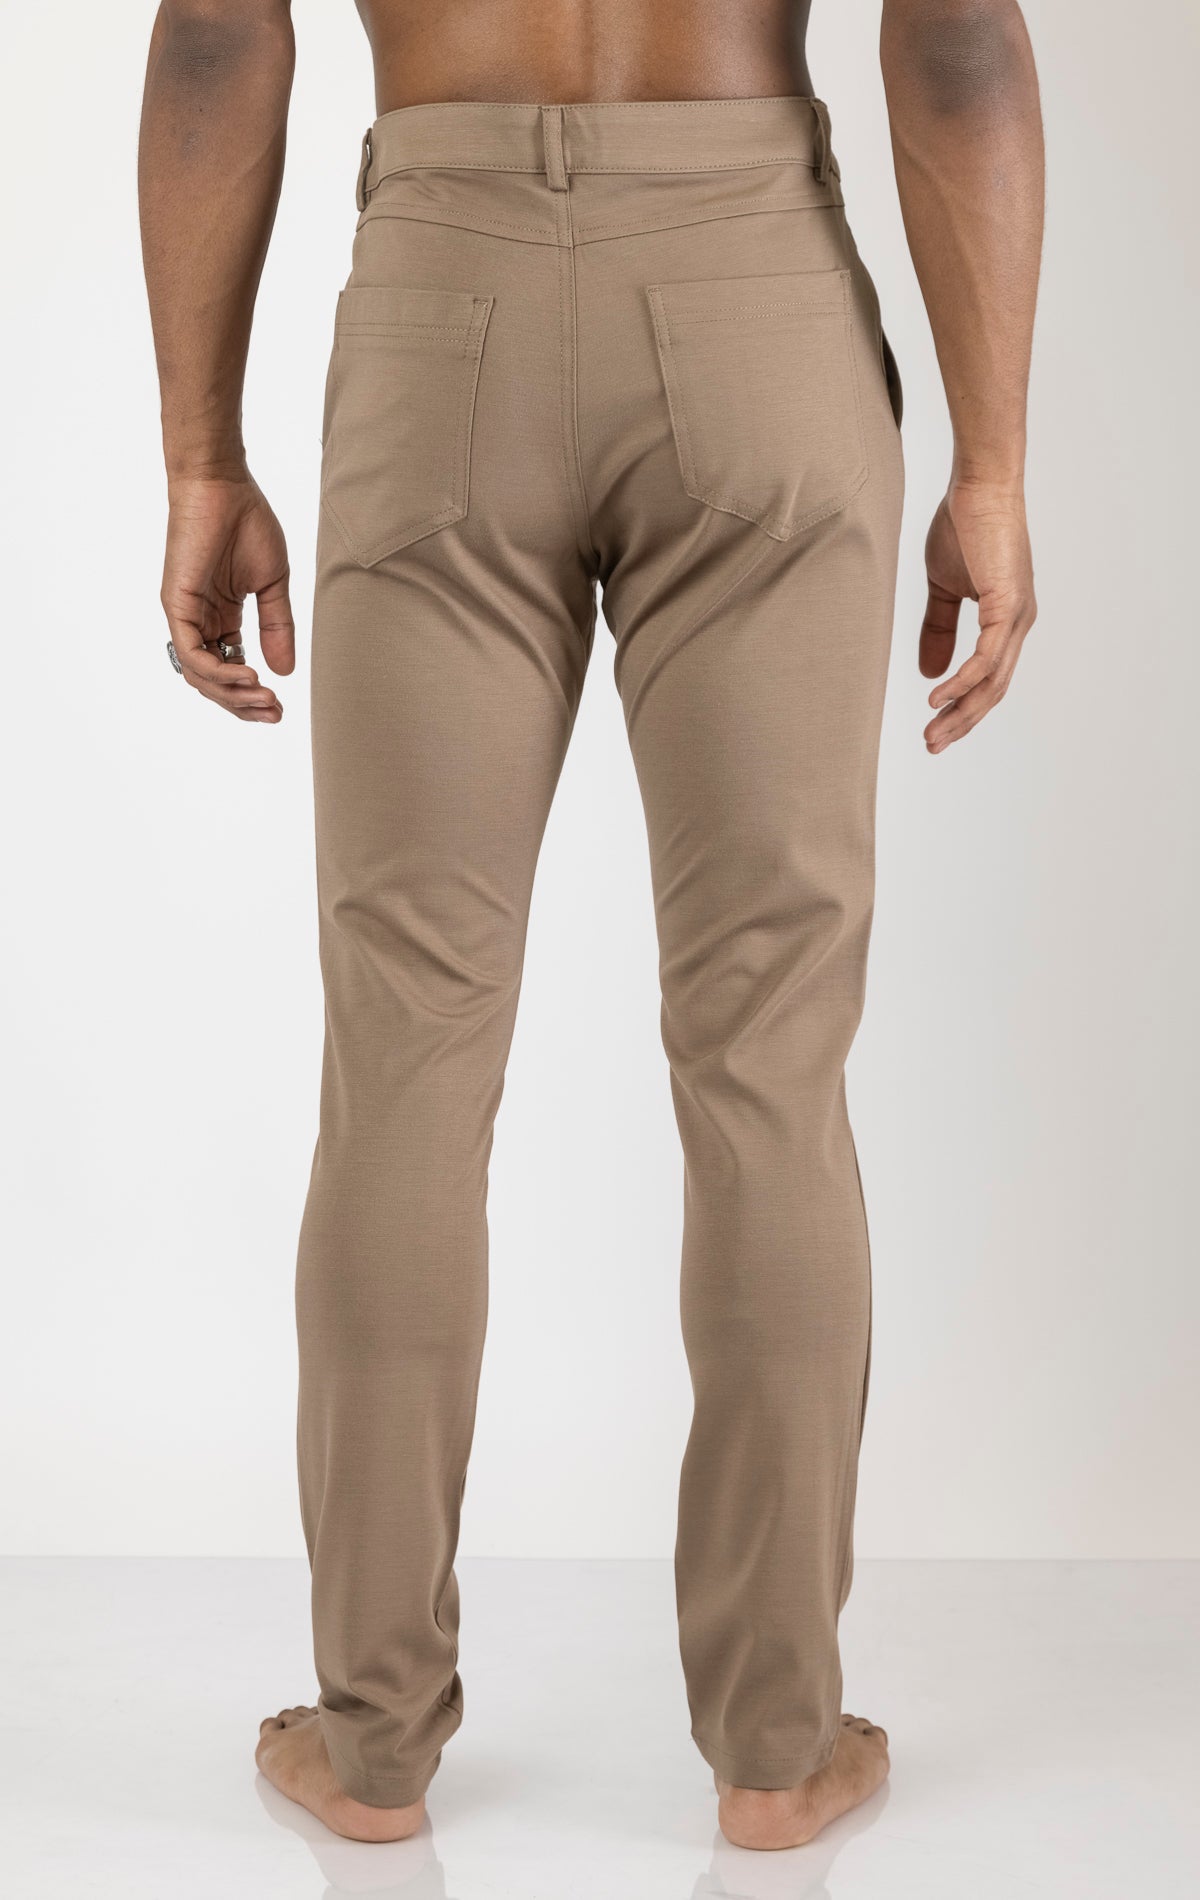 Men's casual wear pants in camel. The pants are made from a blend of rayon (65%), nylon (27%), and elastane (8%) and feature a classic design with straight or tapered legs, belt loops, pockets, and a zip fly with button closure.